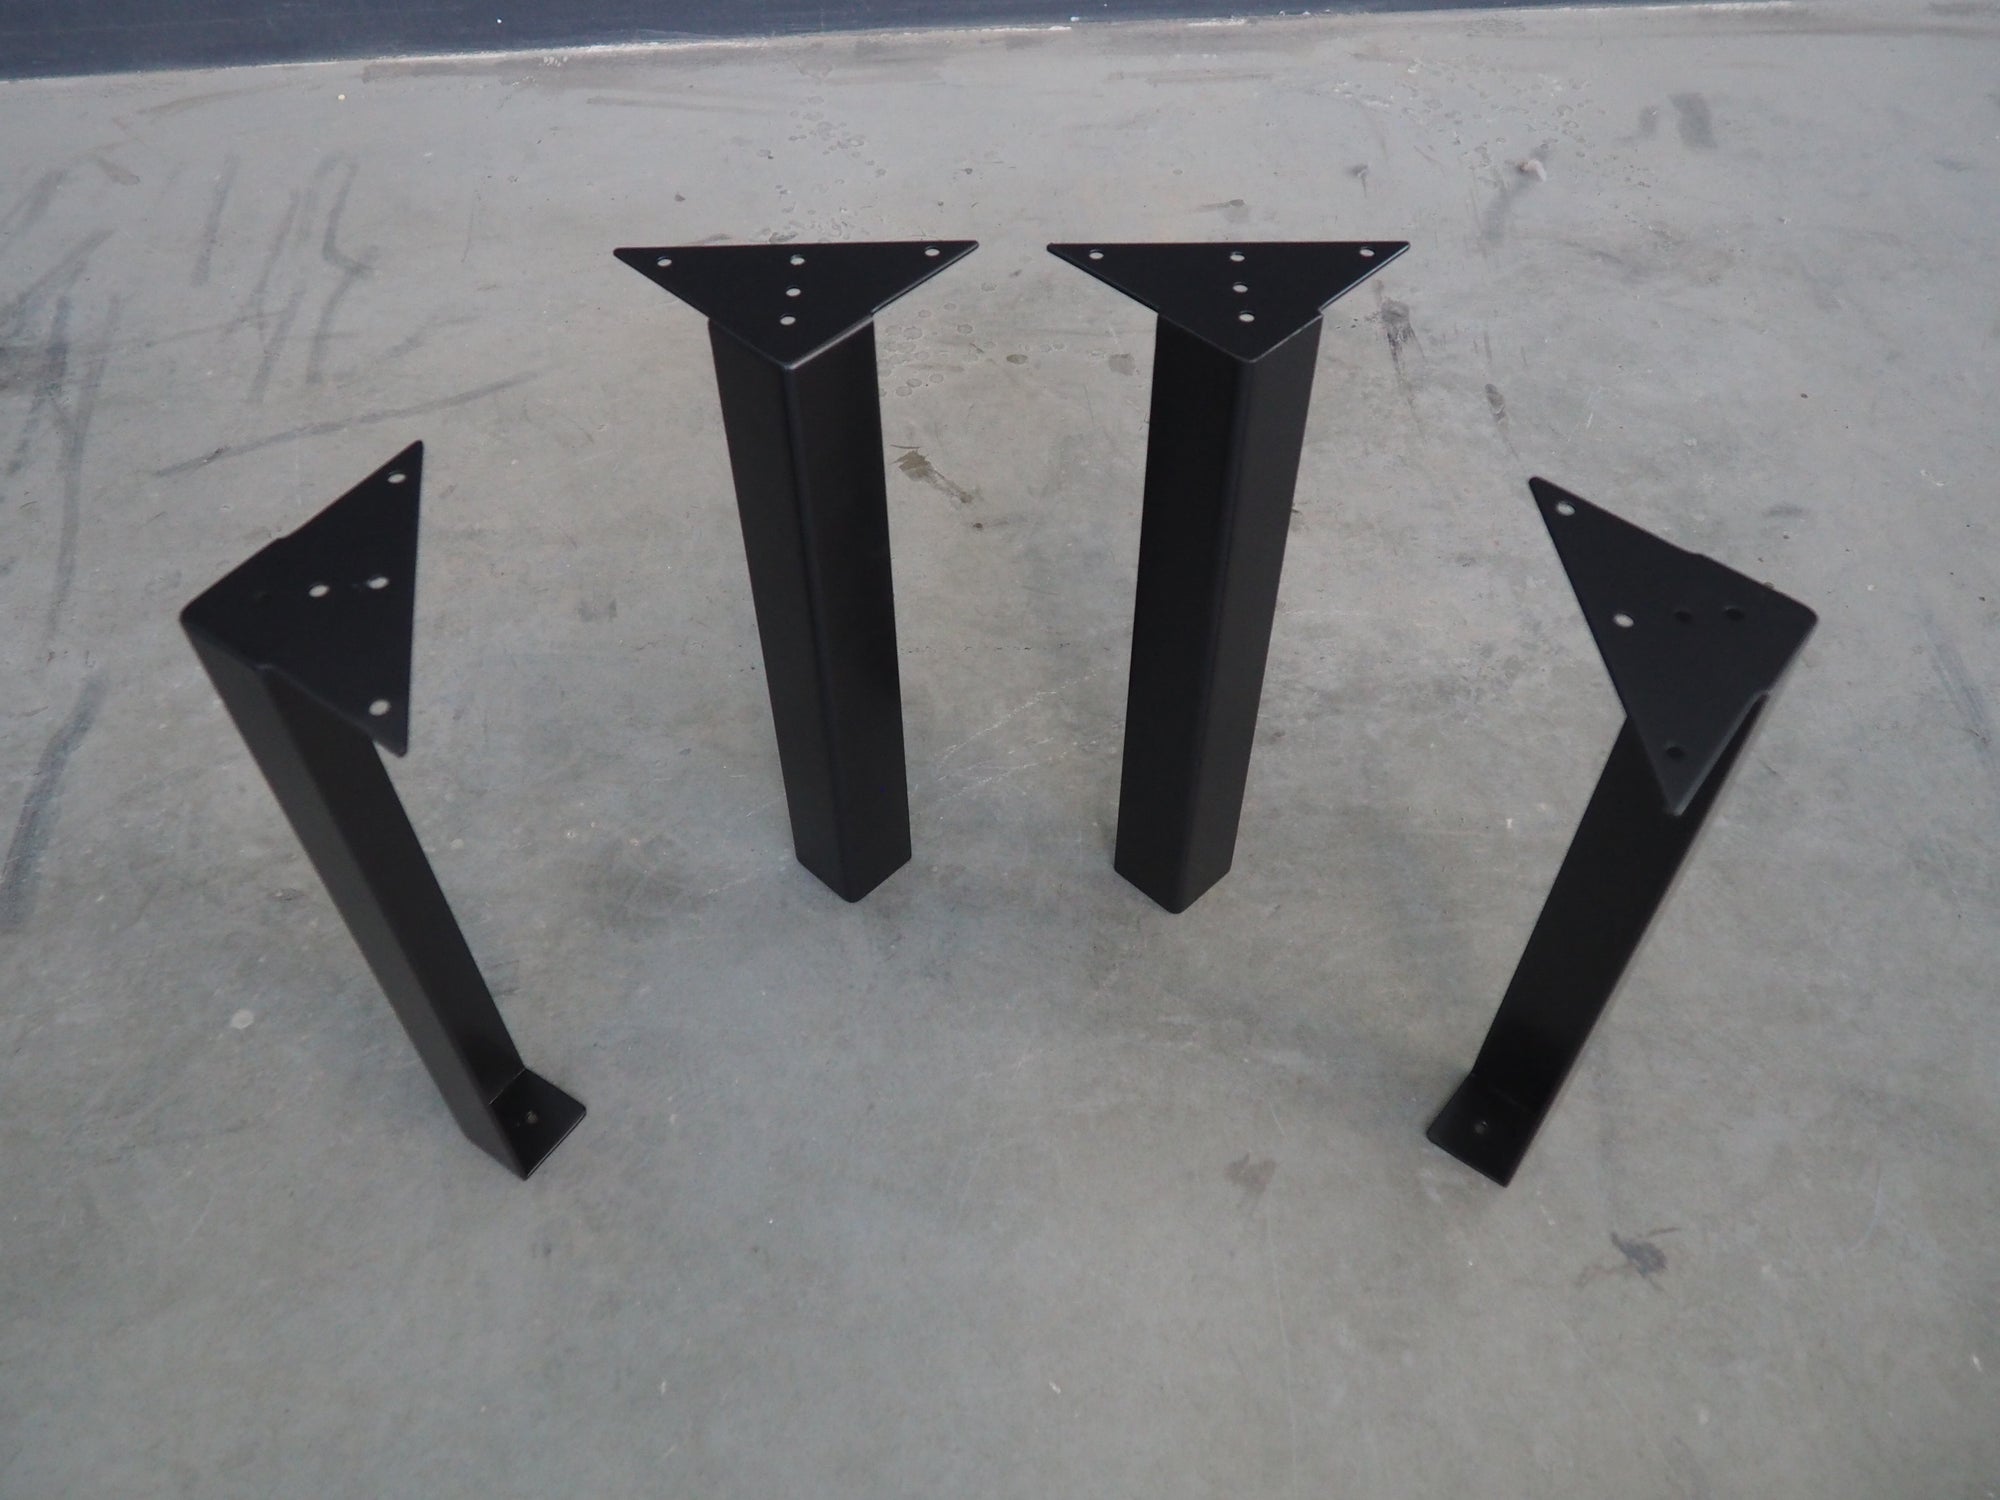 28" Angle Steel Table Legs with Braces, Height 26" - 32" Set(4)